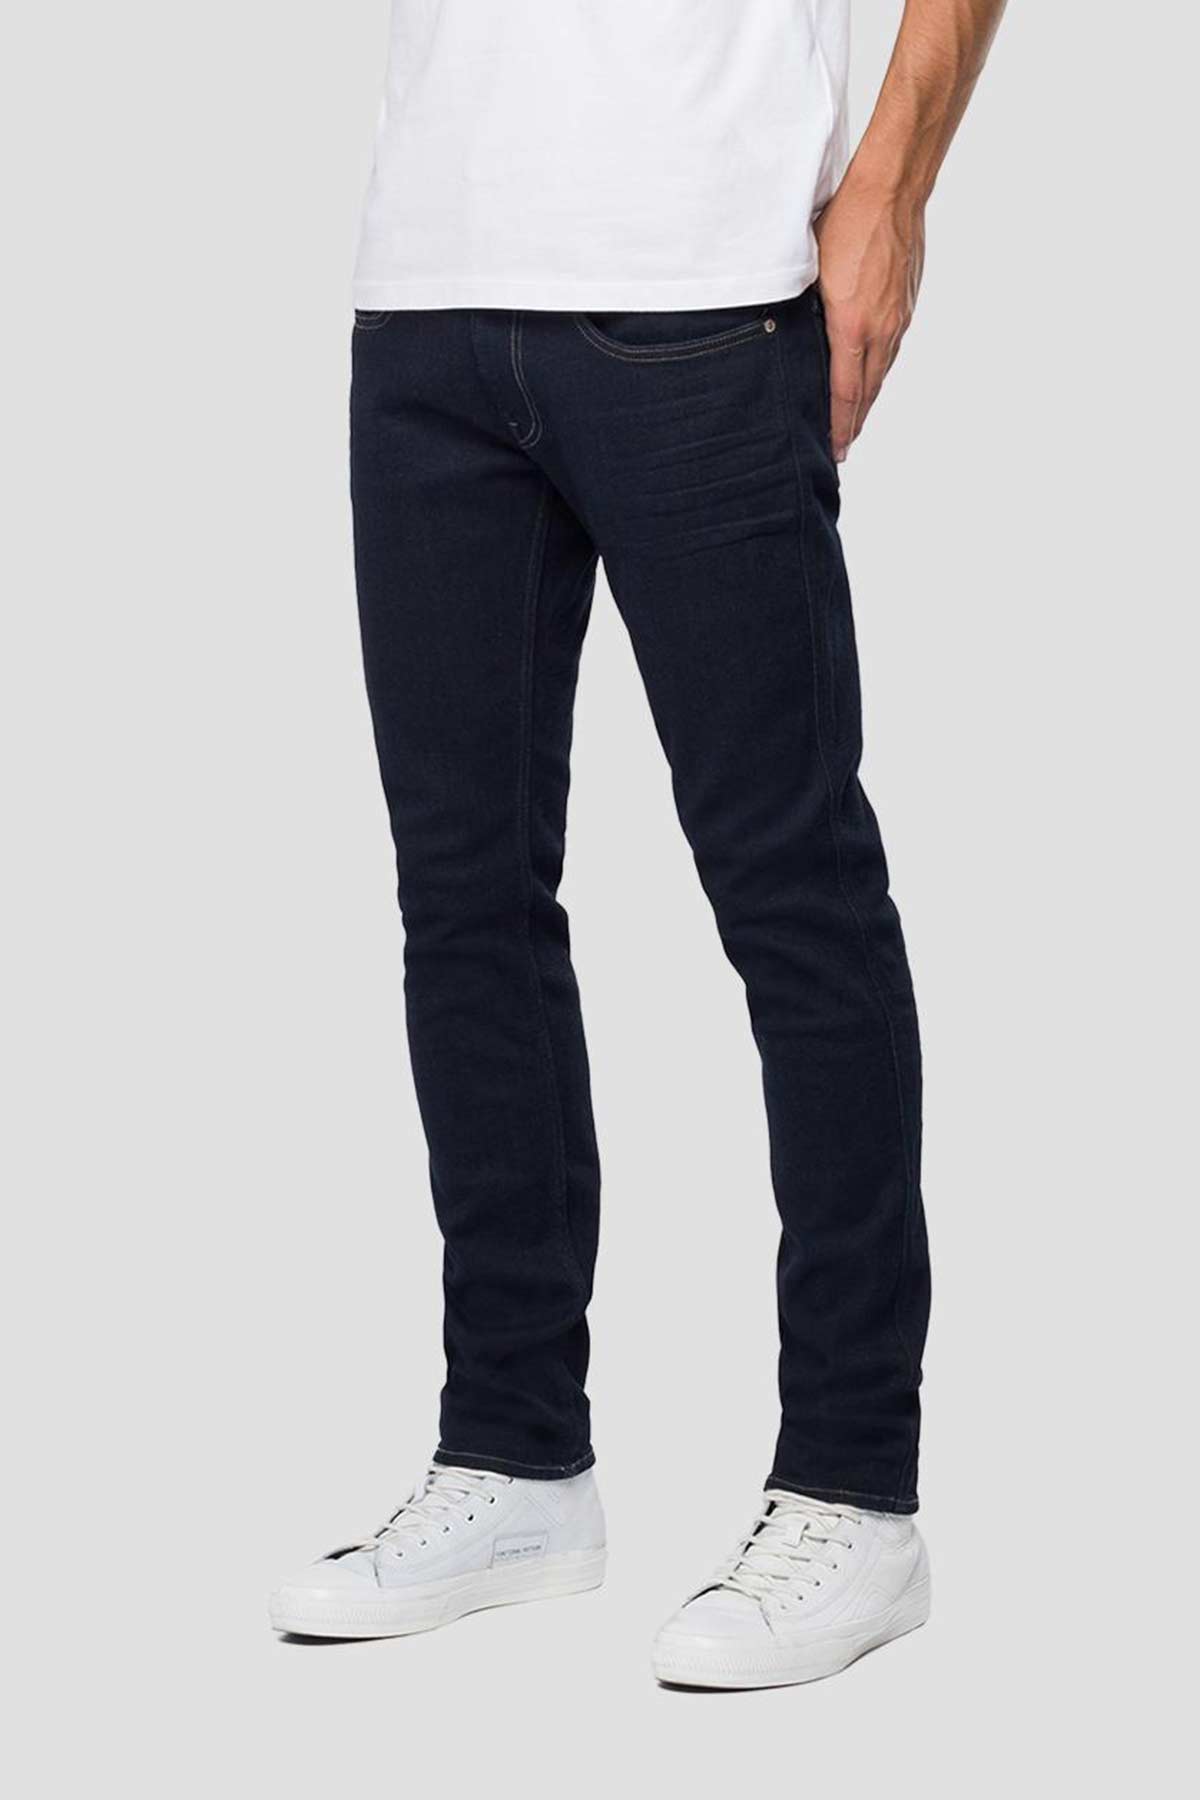 Replay Slim Fit Anbass Jeans-Libas Trendy Fashion Store